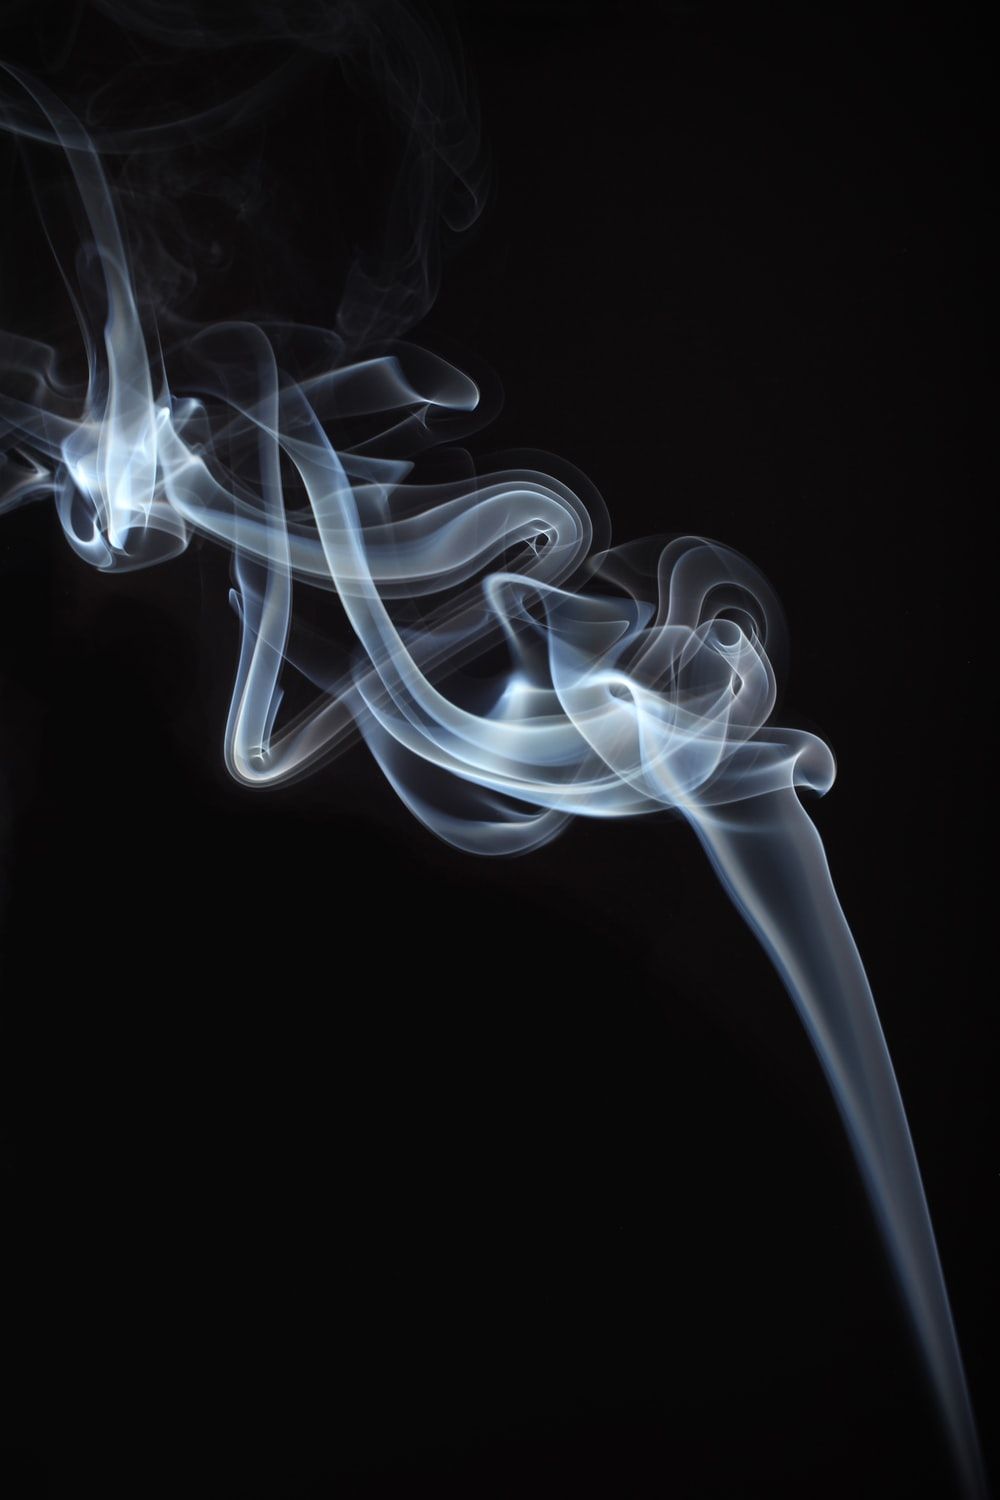 Black And White Smoke Picture. Download Free Image